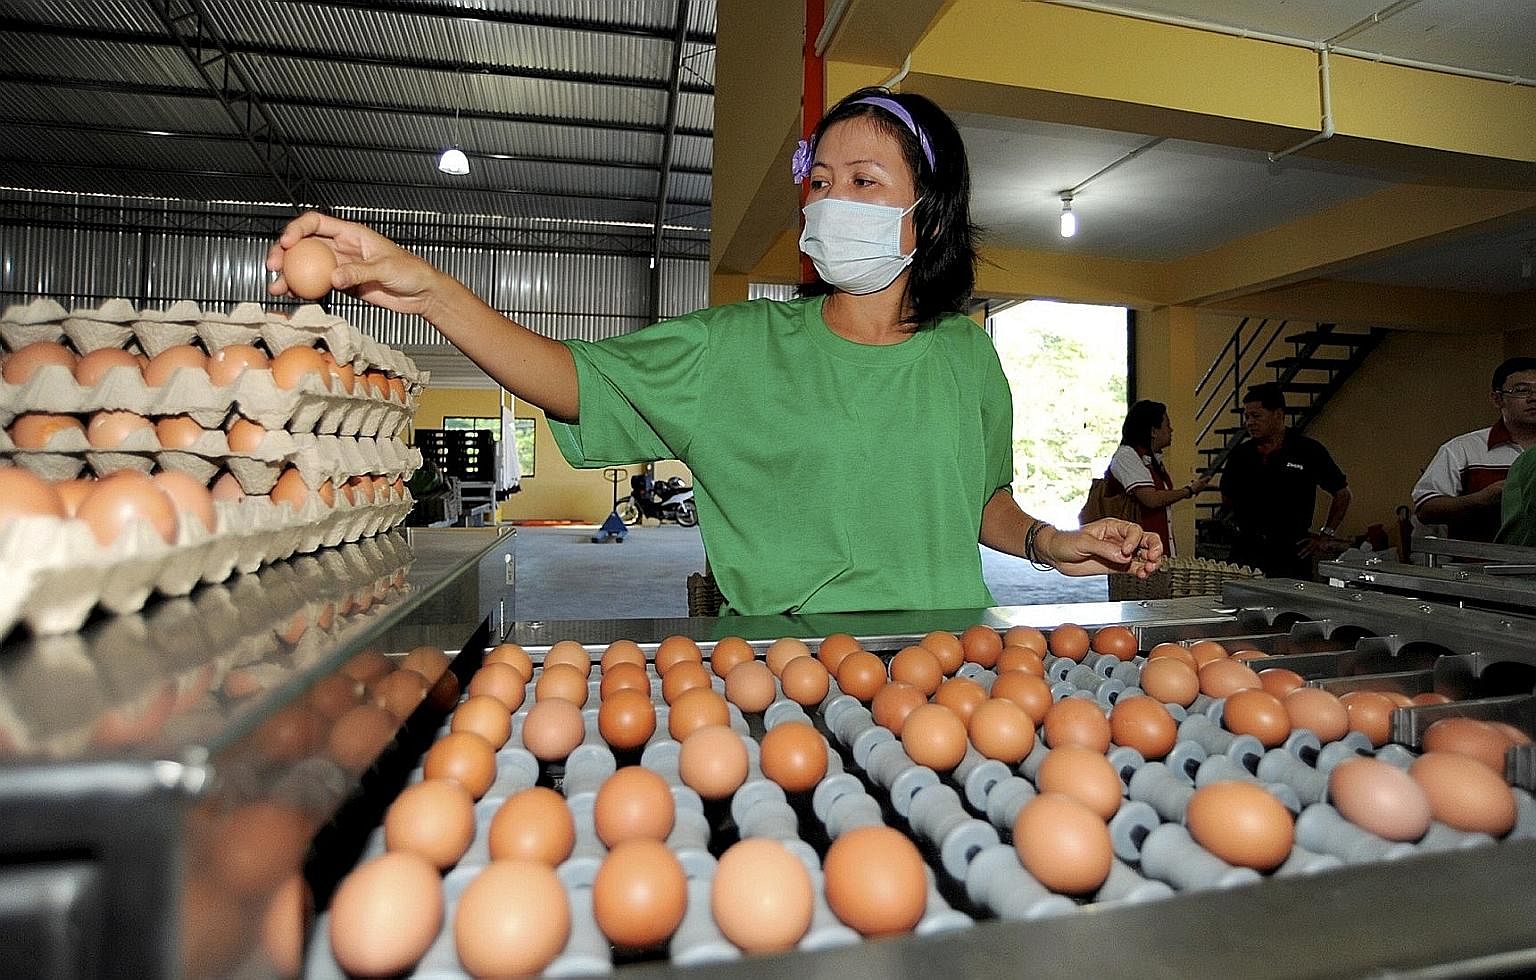 A worker at a chicken egg processing factory in Kuching. Malaysian Minister Saifuddin Nasution Ismail said on Monday that the country was looking into limiting, or stopping, the export of eggs to ensure sufficient supply for the domestic market.